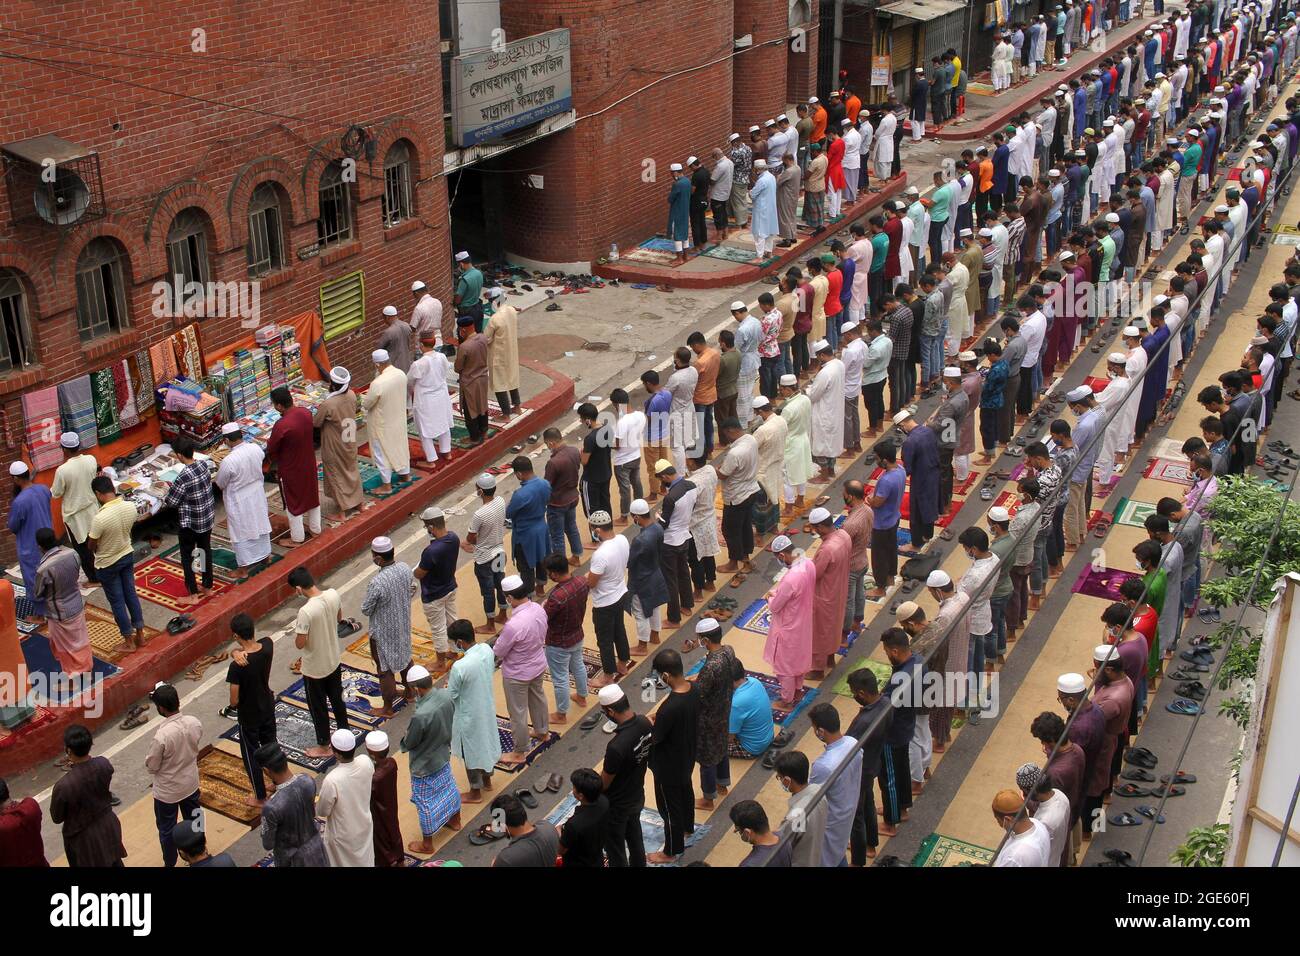 DHAKA, BANGLADESH  -AUGUST 13: Aerial view of thousands of Muslims meeting  take part during a mass  Jummah Prayer, Due this Islamic ritual is mandatory act, it is performed every Friday to fulfill its obligations as a faithful.  Jummah is the holiest day of the week on which special congregational prayers are offered. Fridays are considered a celebration in their own right and Muslims take special care in wearing clean clothes, bathing, and preparing special meals on this day. On August 13, 2021 in Dhaka, Bangladesh. Credit: Eyepix Group/The Photo Access Stock Photo